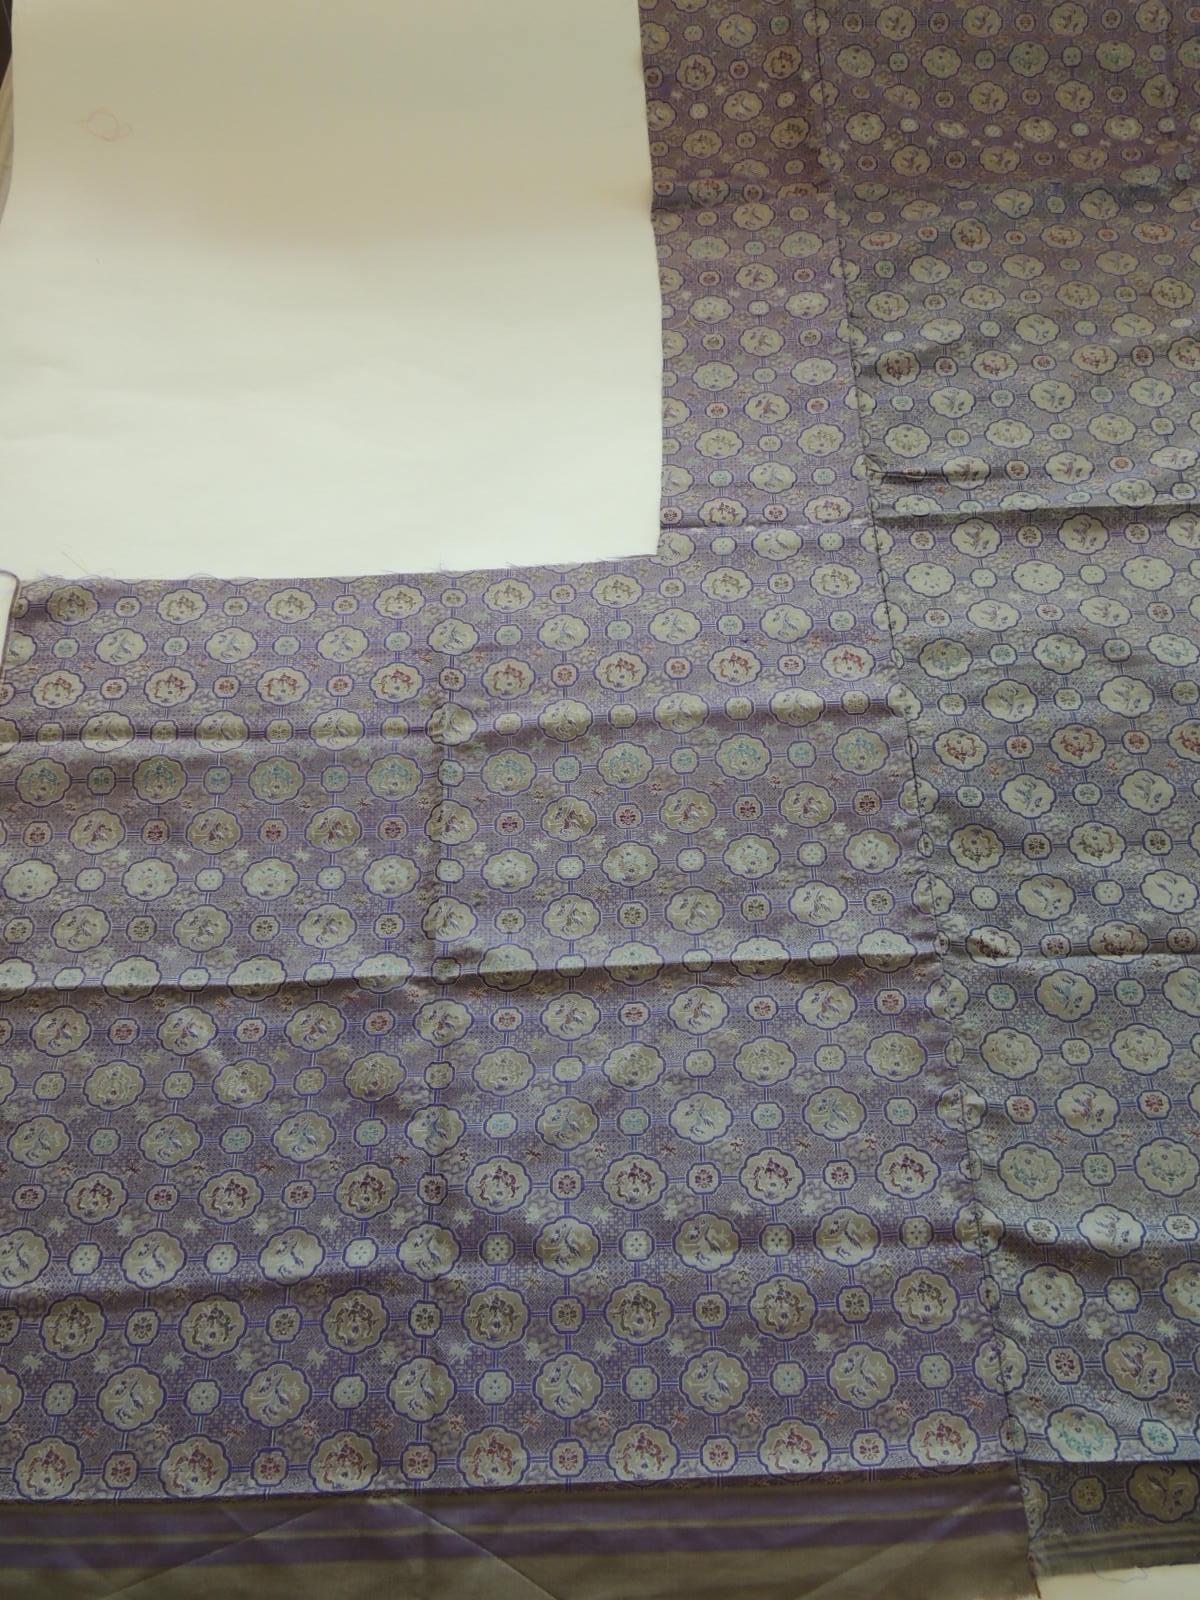 Vintage Purple and Silver Woven Silk Obi Textile For Sale at 1stDibs